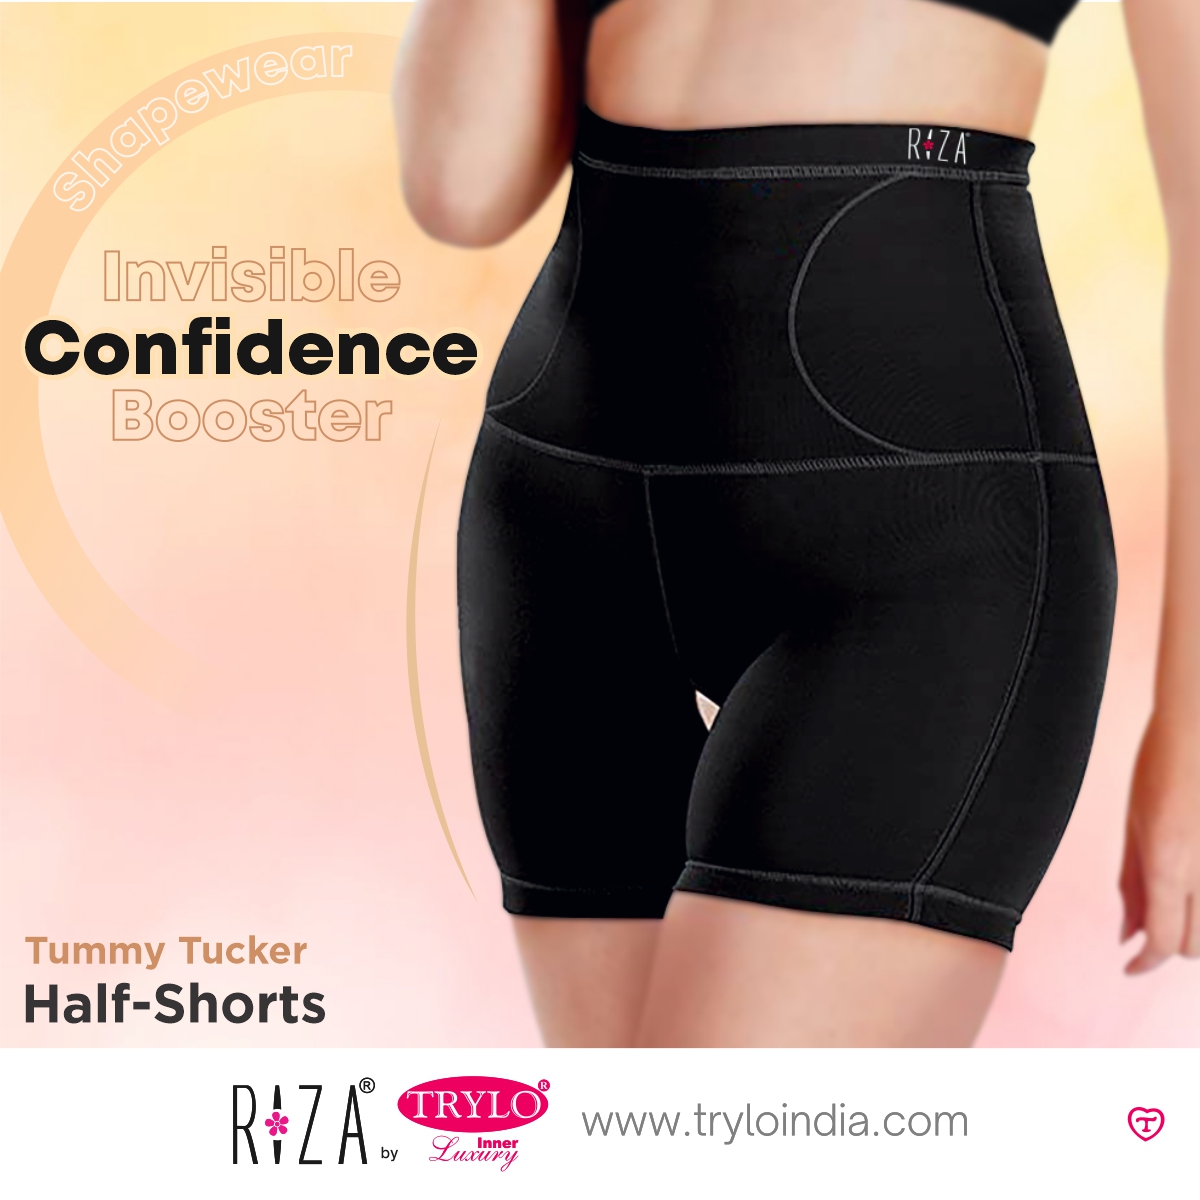 RizaTrylo uae - Shape Your this Year With the RIZA BY